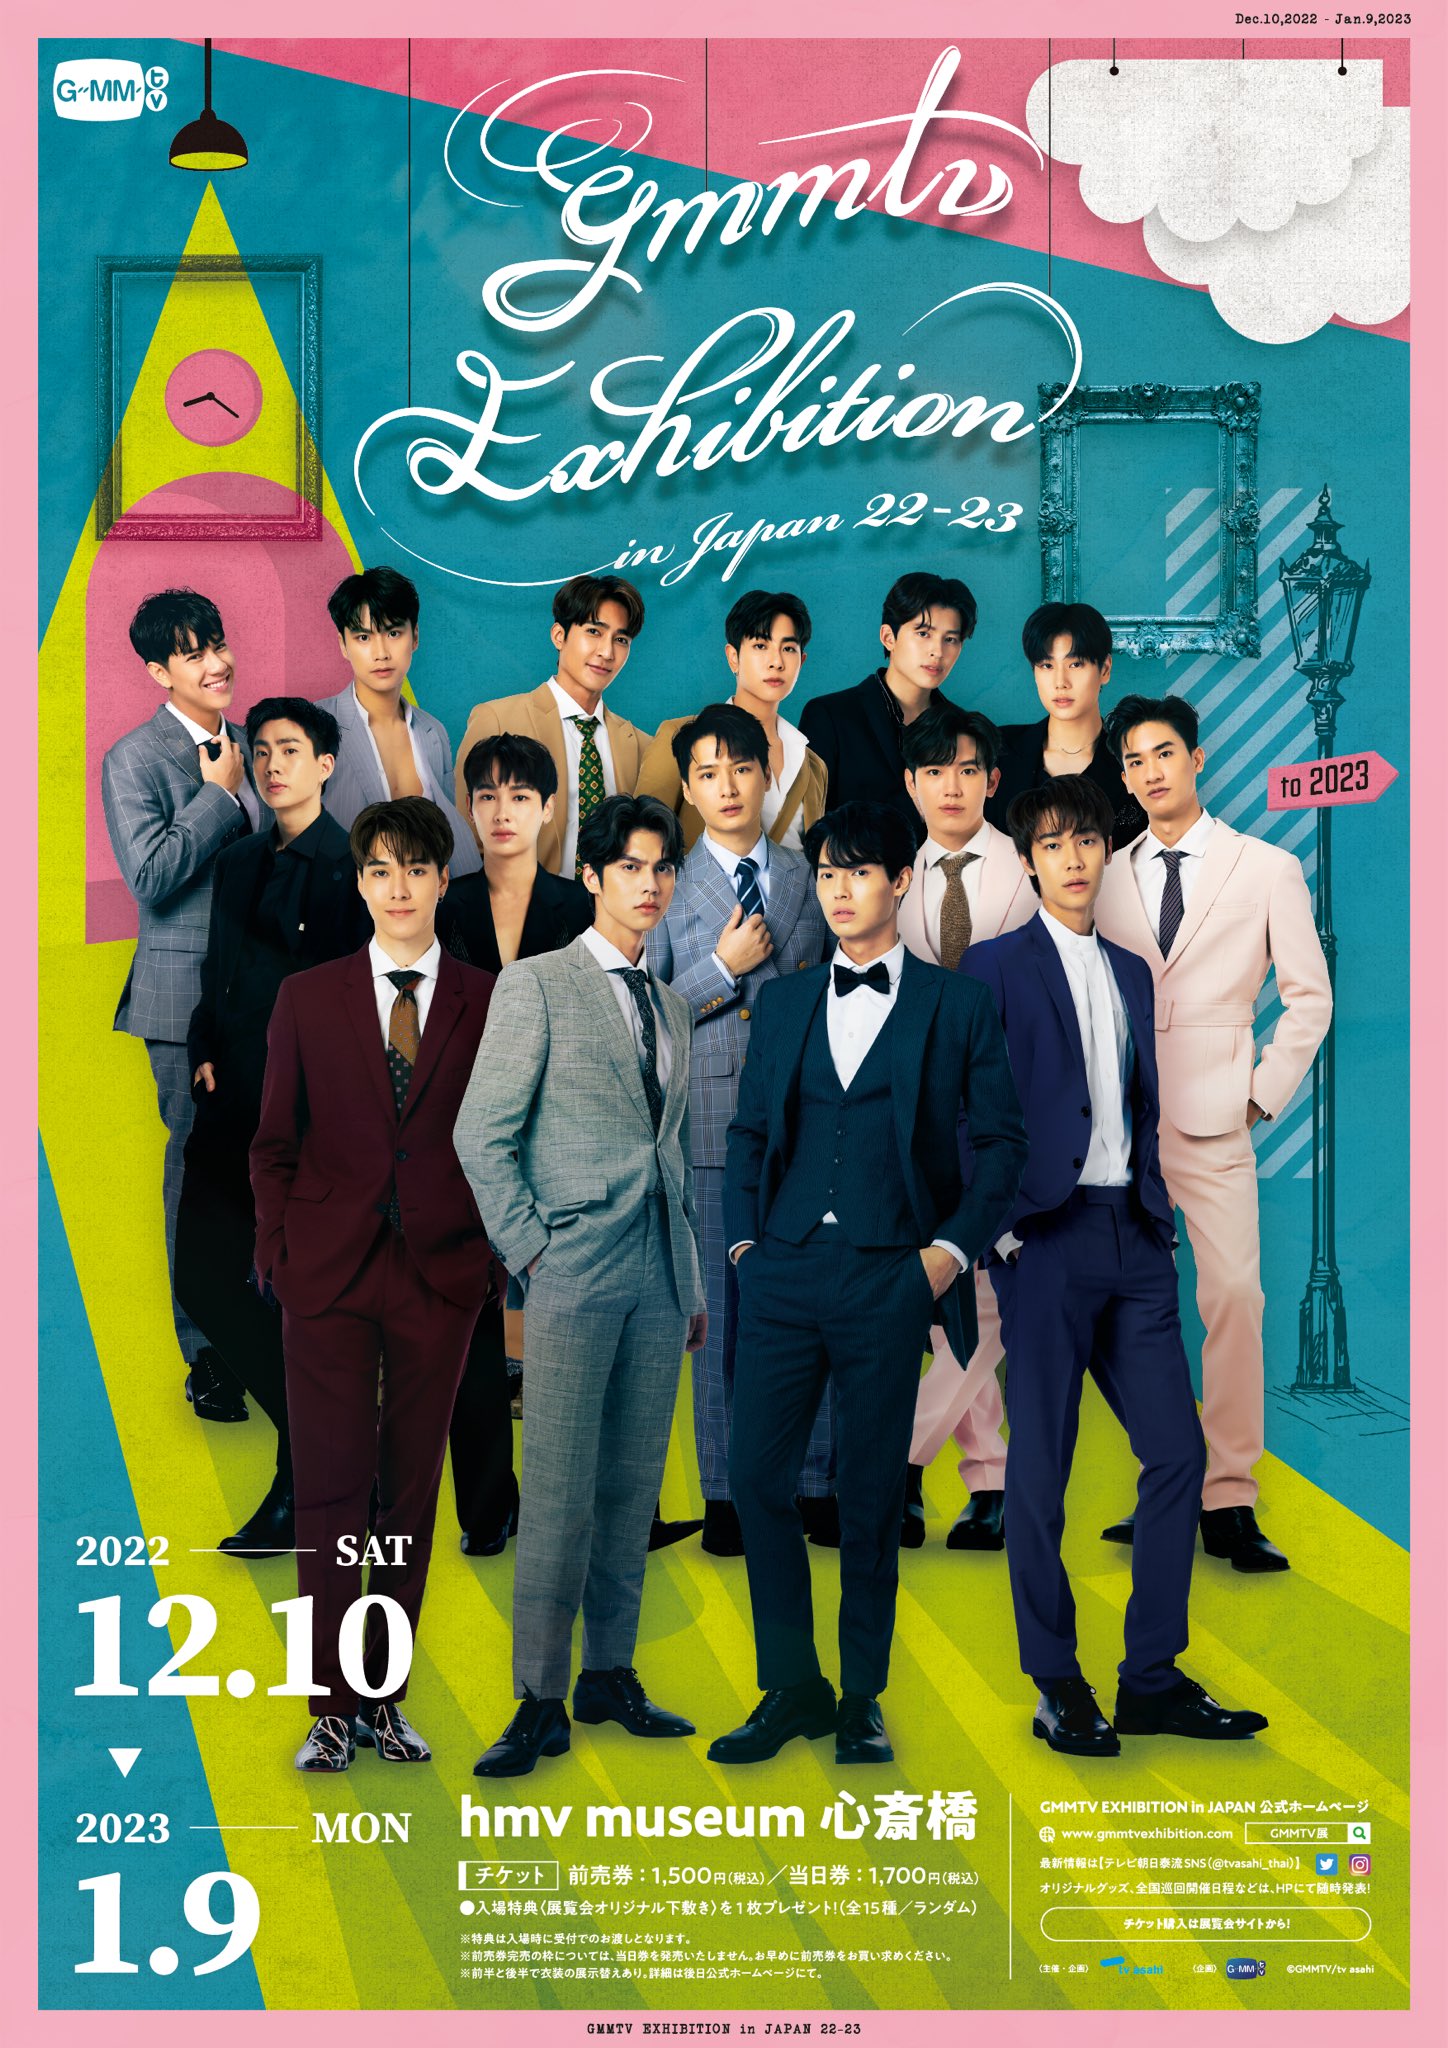 GMMTV EXHIBITION in JAPAN 22-23｜BL network（タイBLドラマ情報サイト）